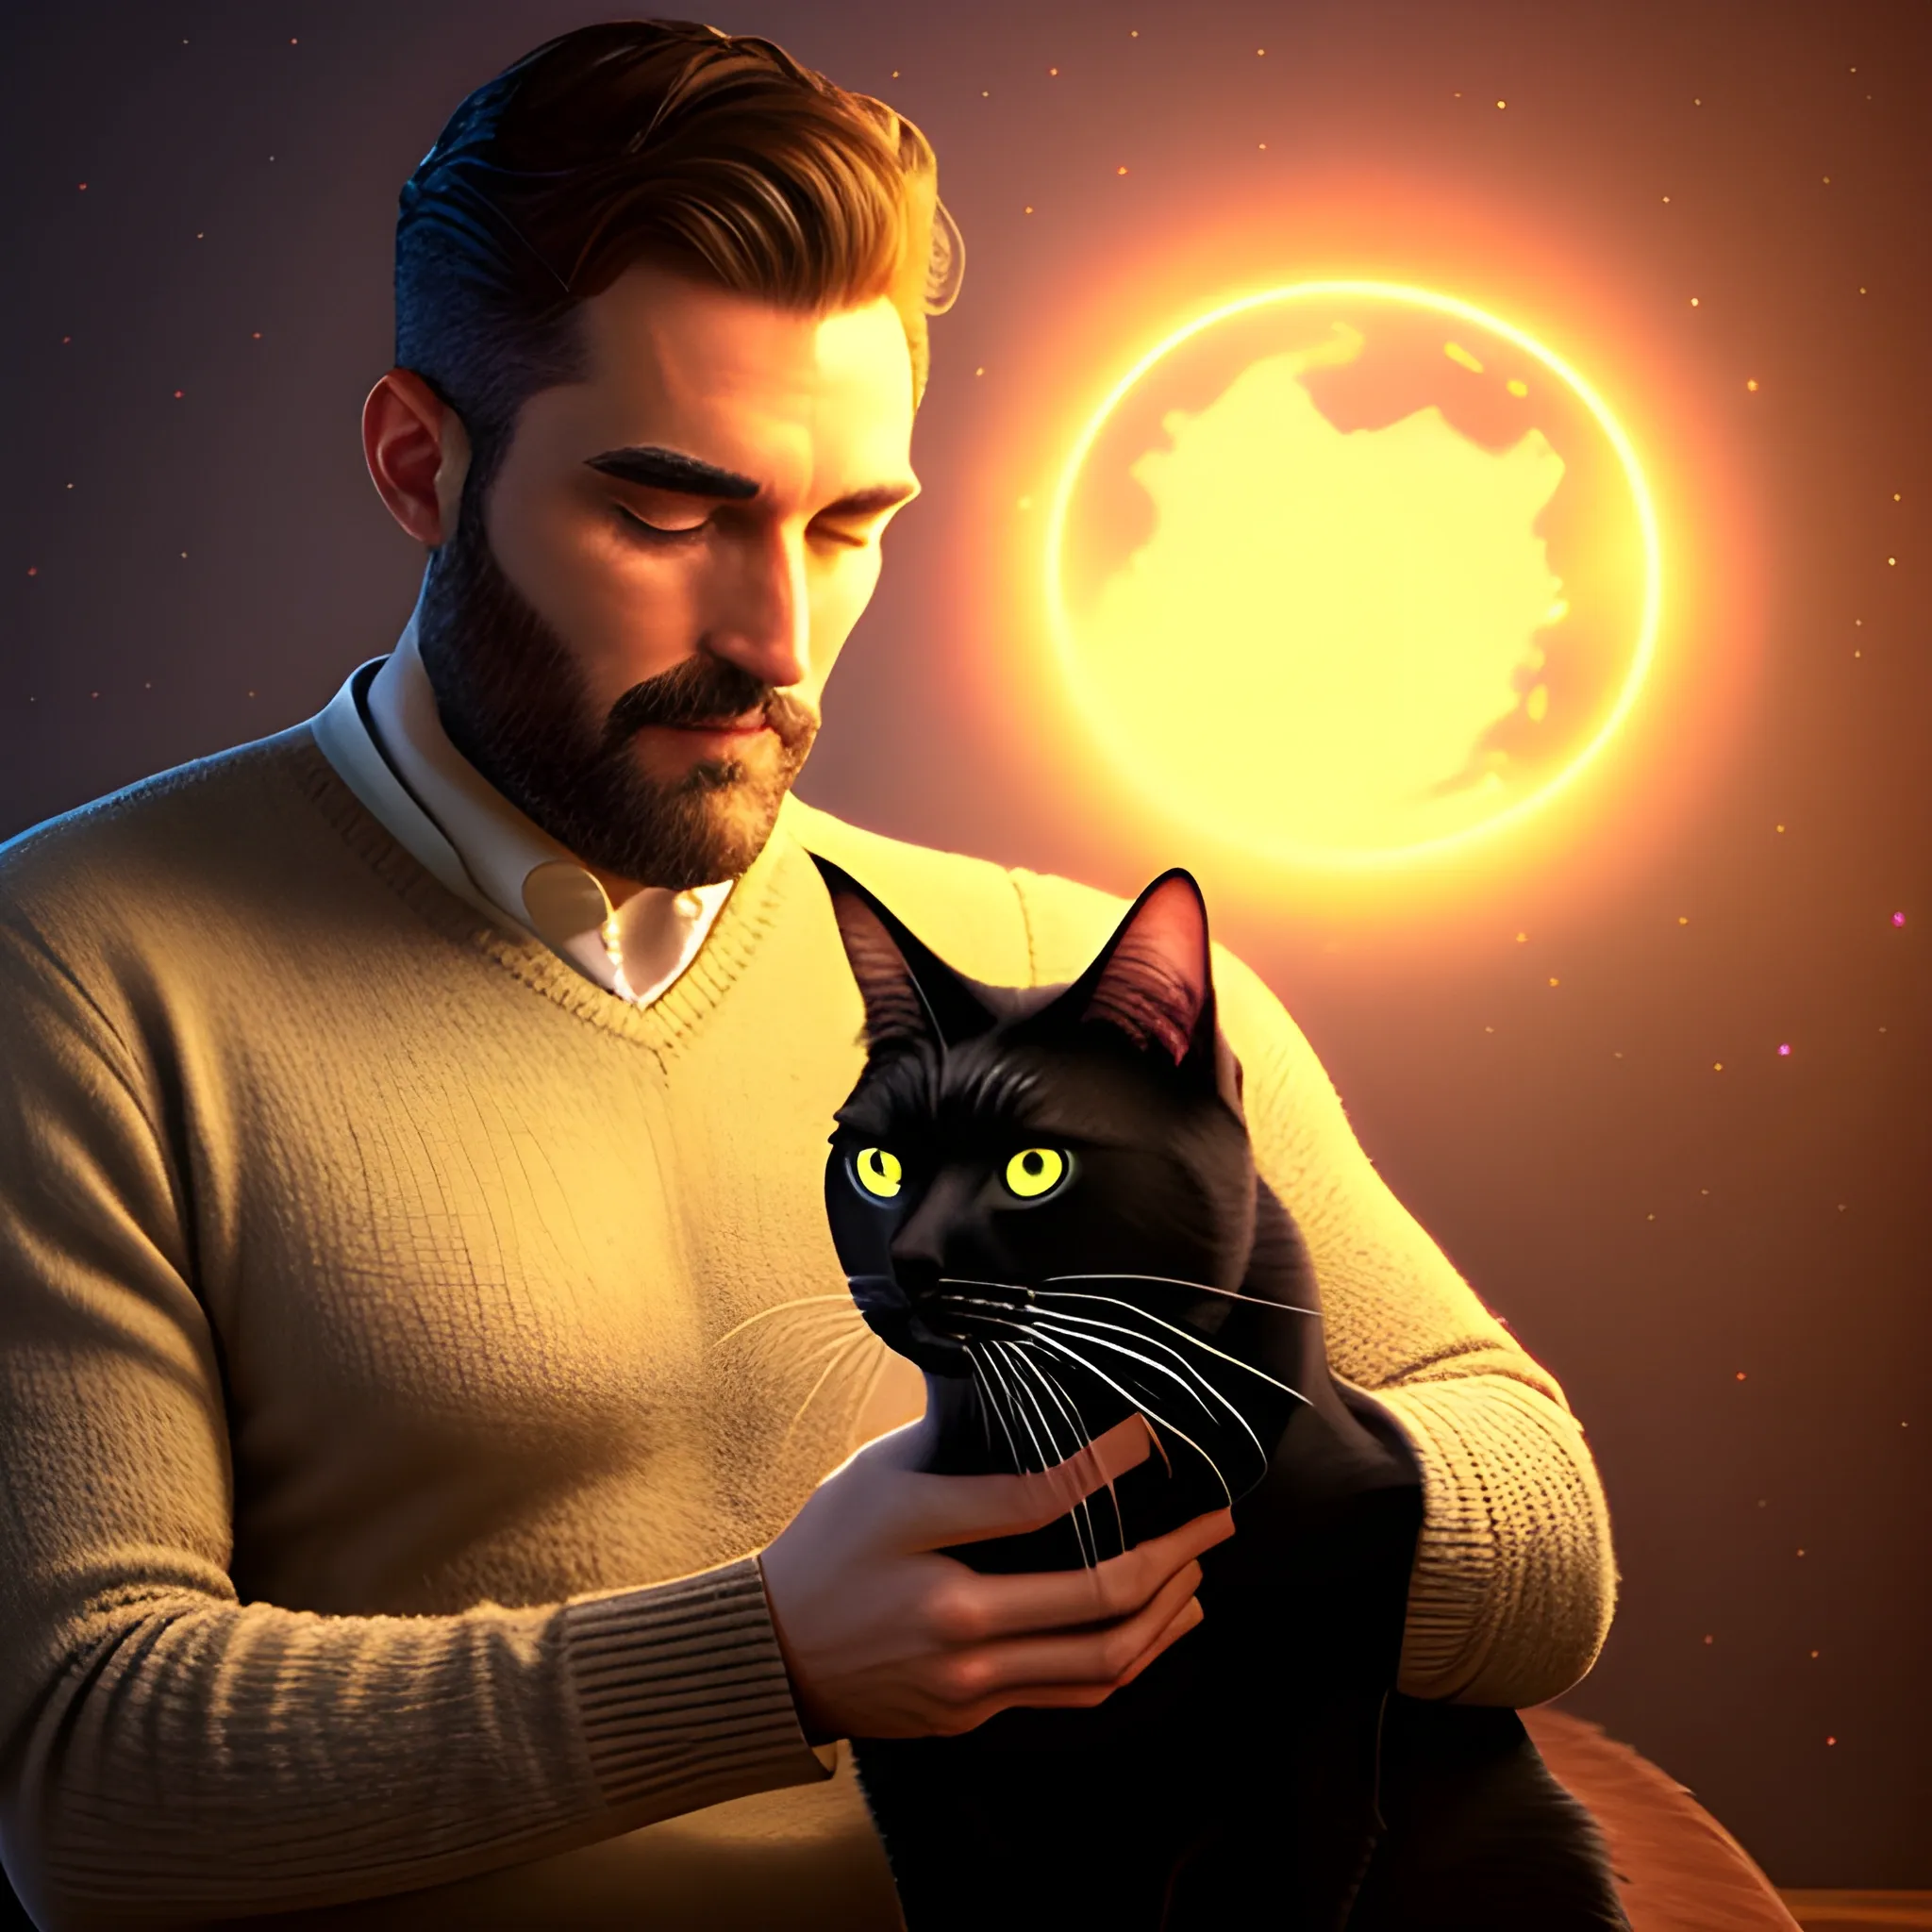 full image,magical dream thoughts,boy and cat,warm and loving,light,